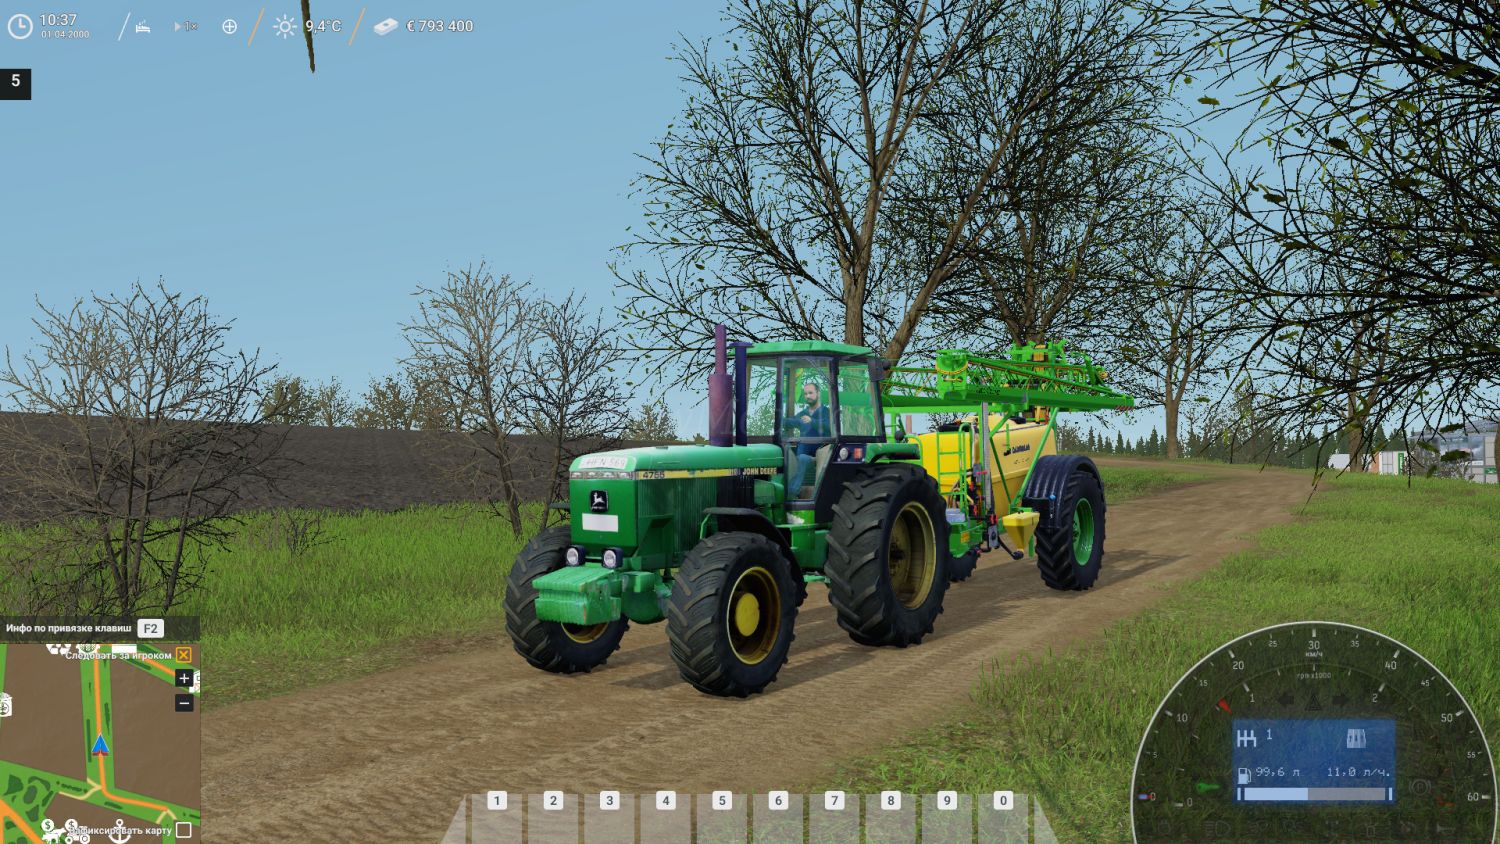 Unique tractor John Deere 4755 for the game Cattle and Crops Mods